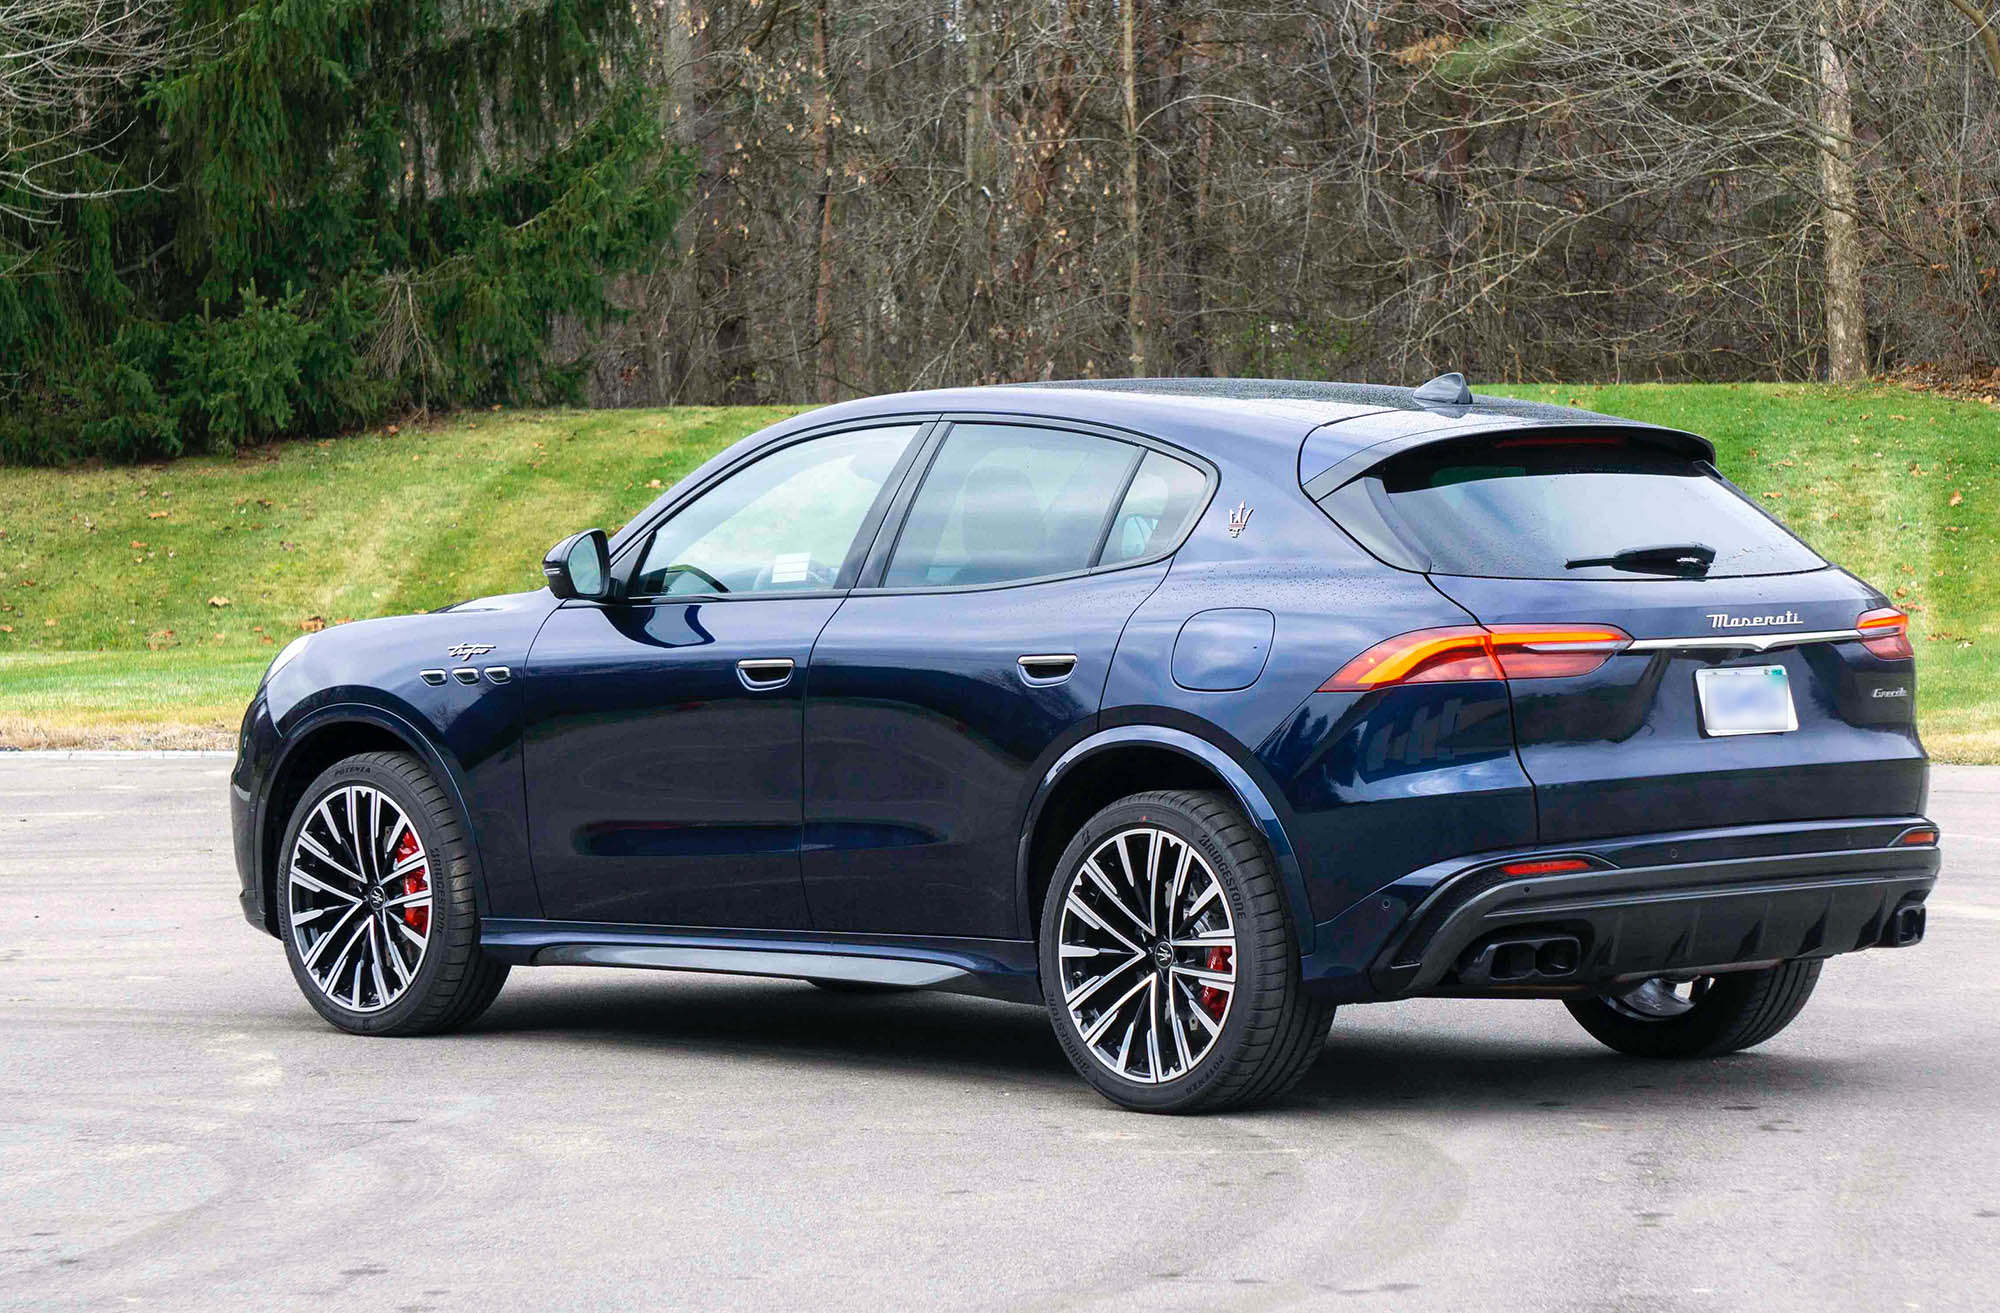 2023 Maserati Grecale in dark blue parked in front of trees and grass